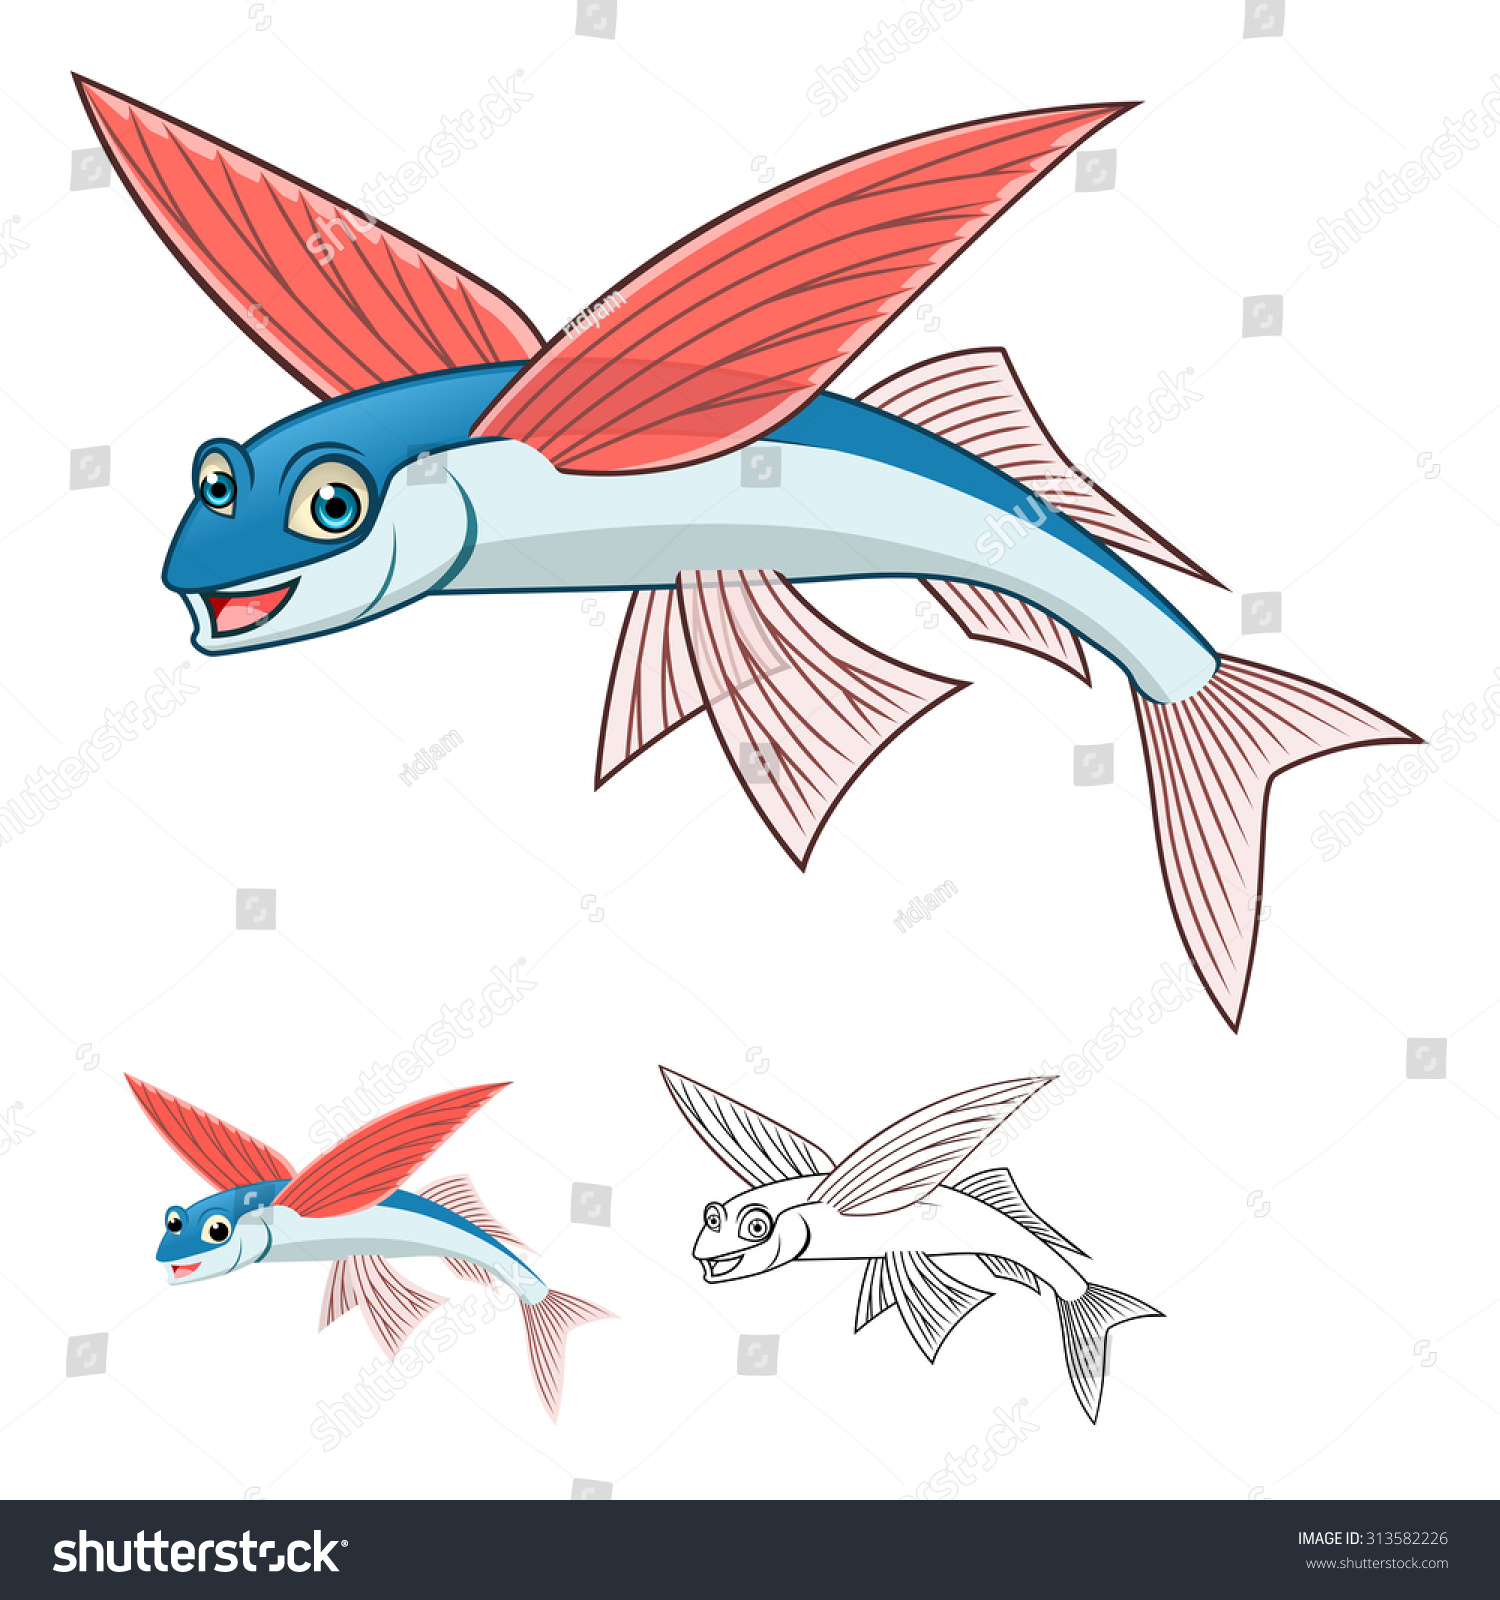 clipart flying fish - photo #31